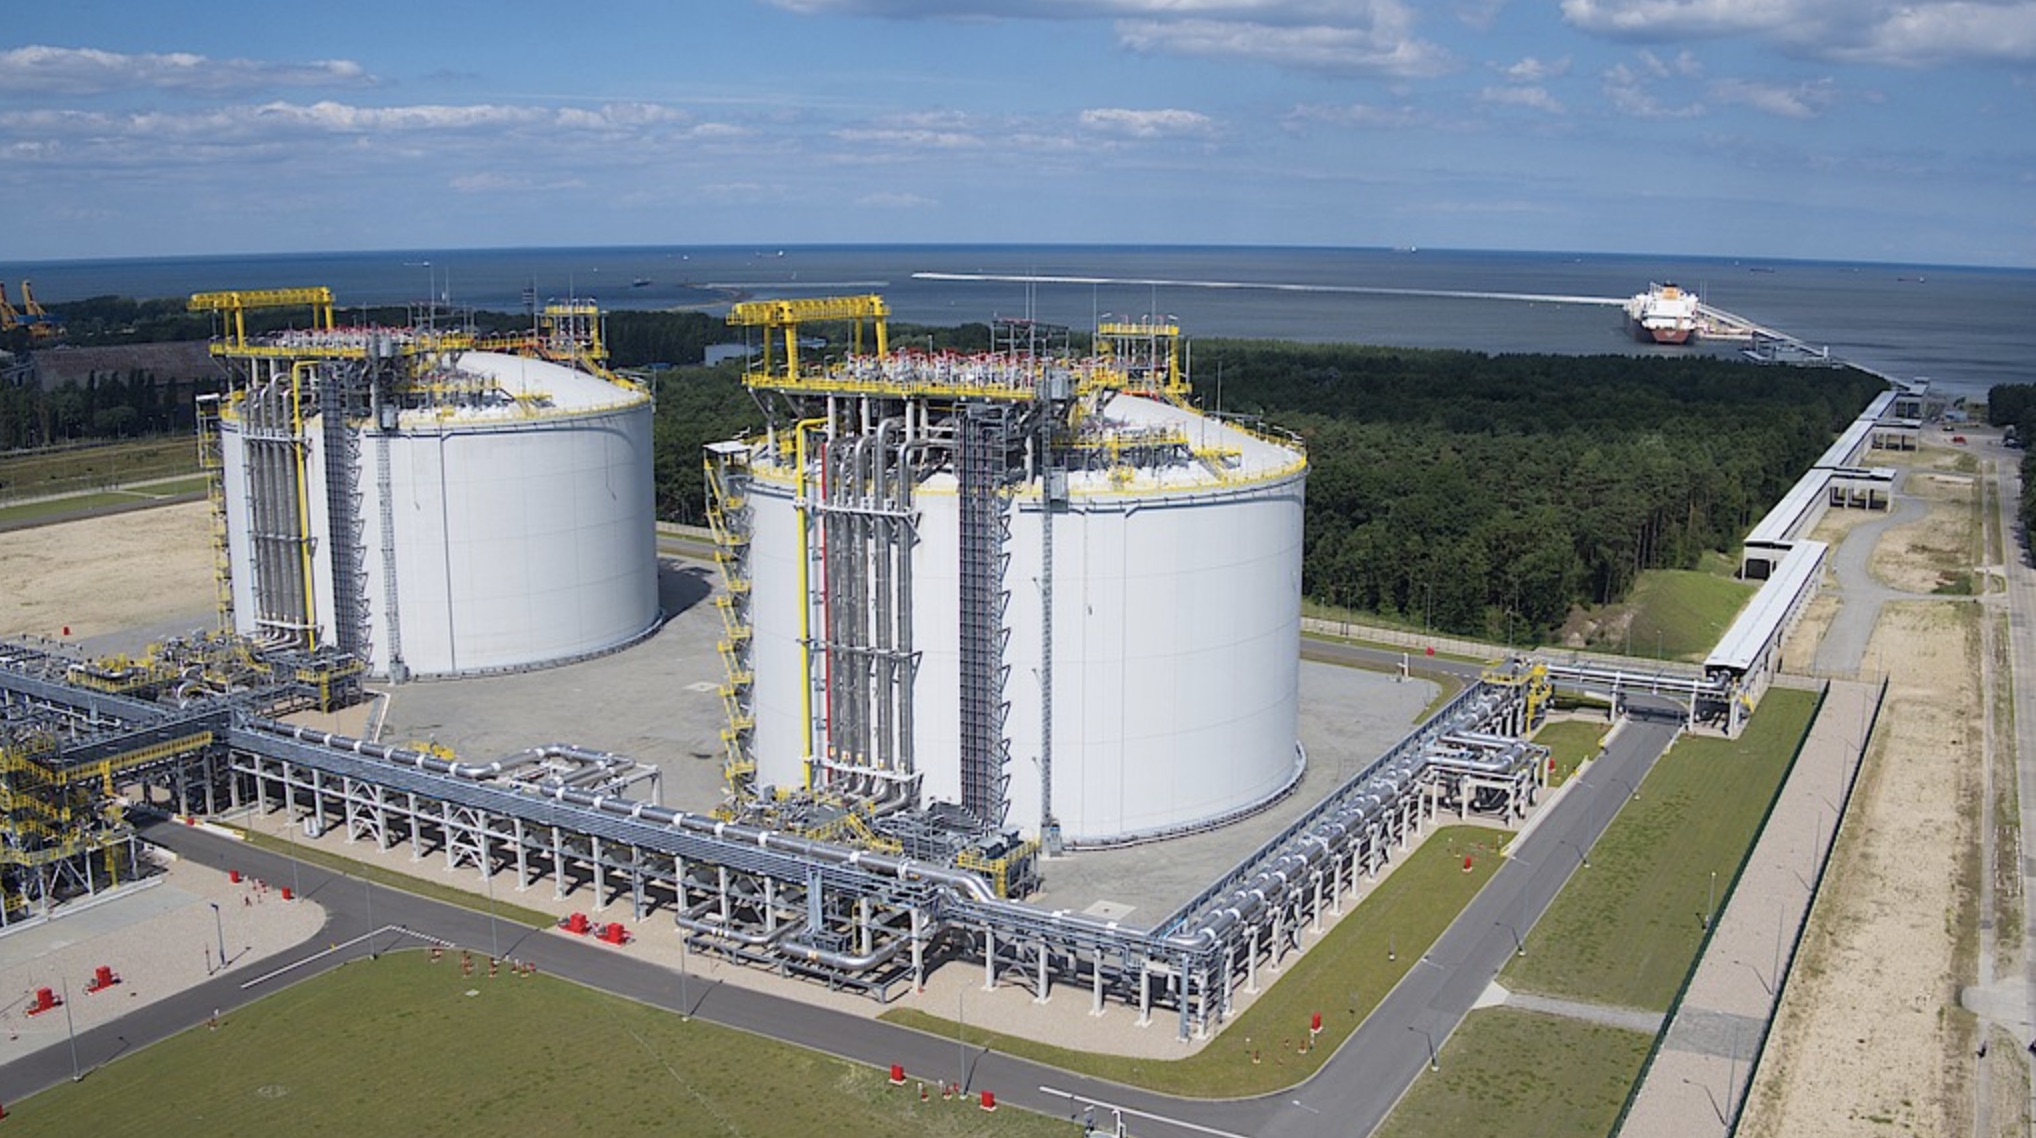 Contract for the purchase of key equipment for the expansion program of the Lng Terminal in Świnoujście signed - MarinePoland.com